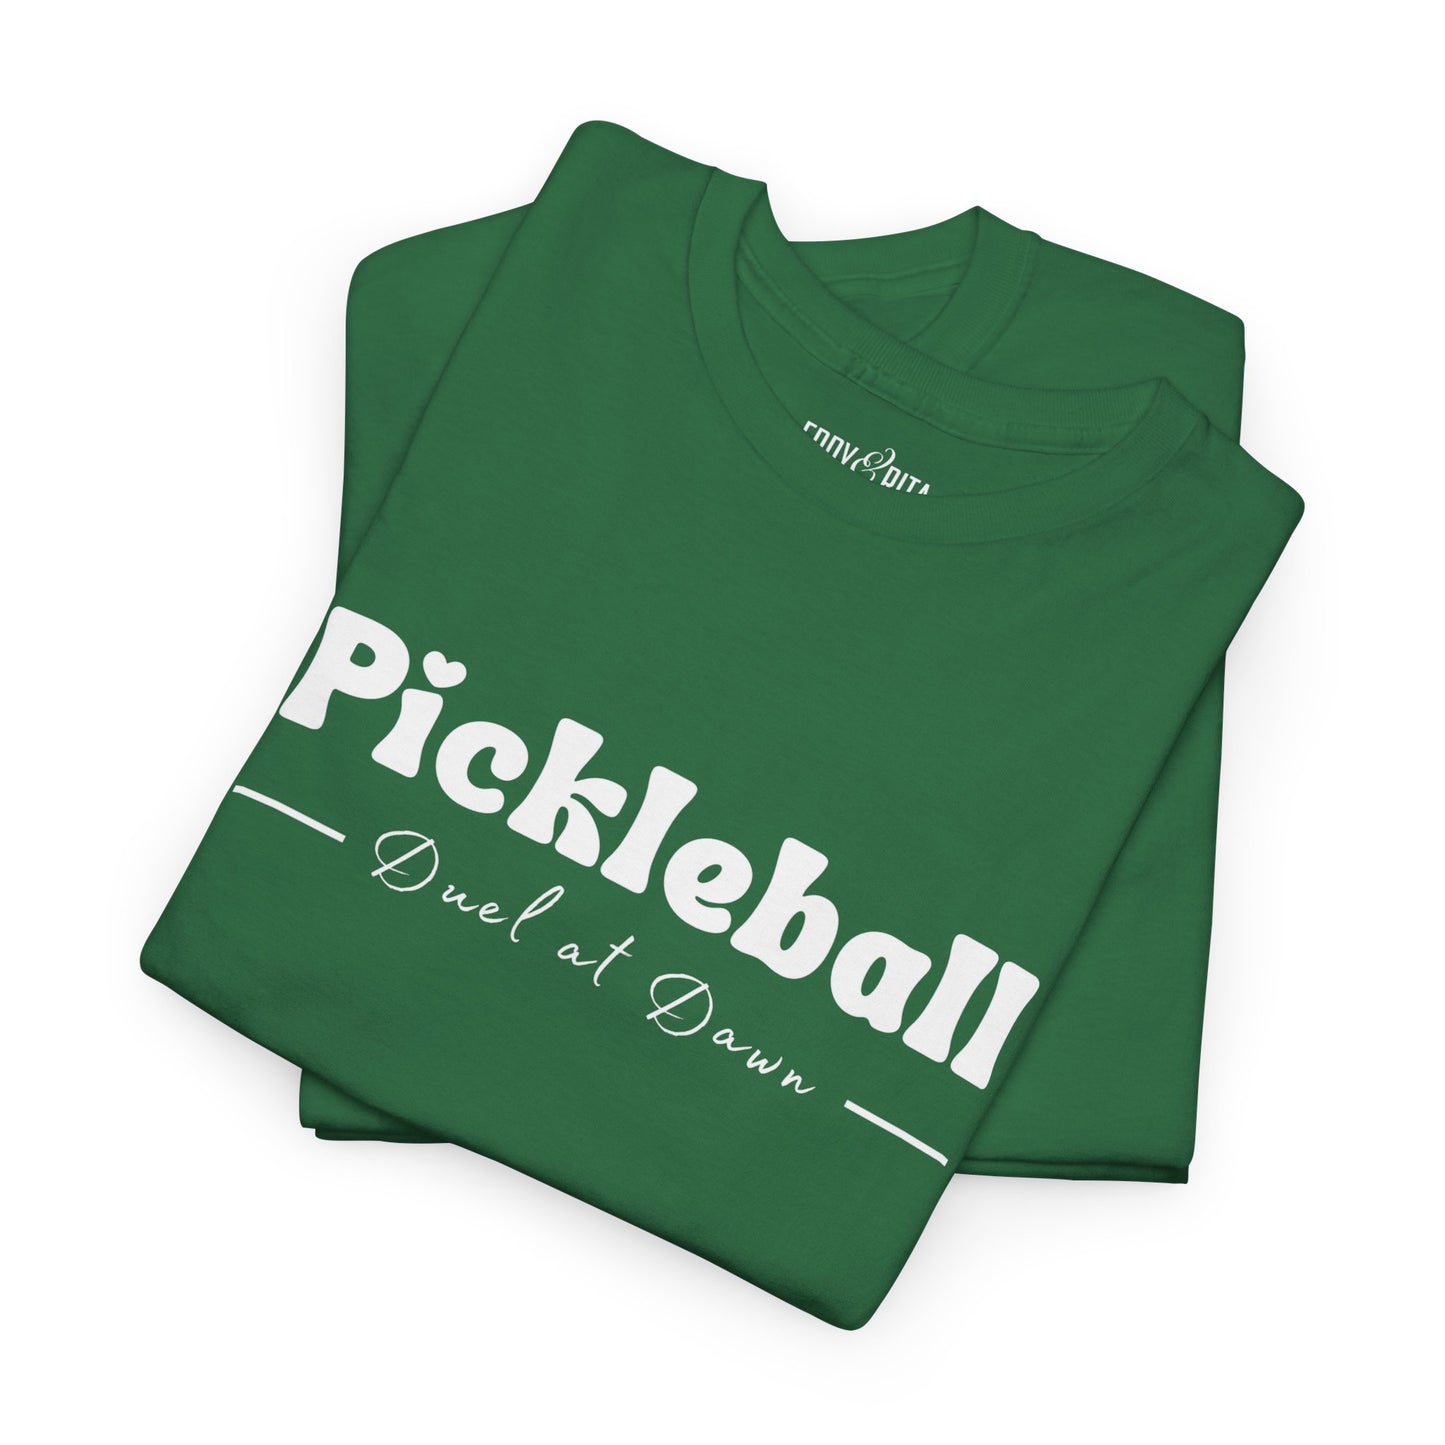 Eddy and Rita Women's Heavy Cotton T-Shirt - "Pickleball Duel at Dawn" Graphic Tee for Pickleball Enthusiasts